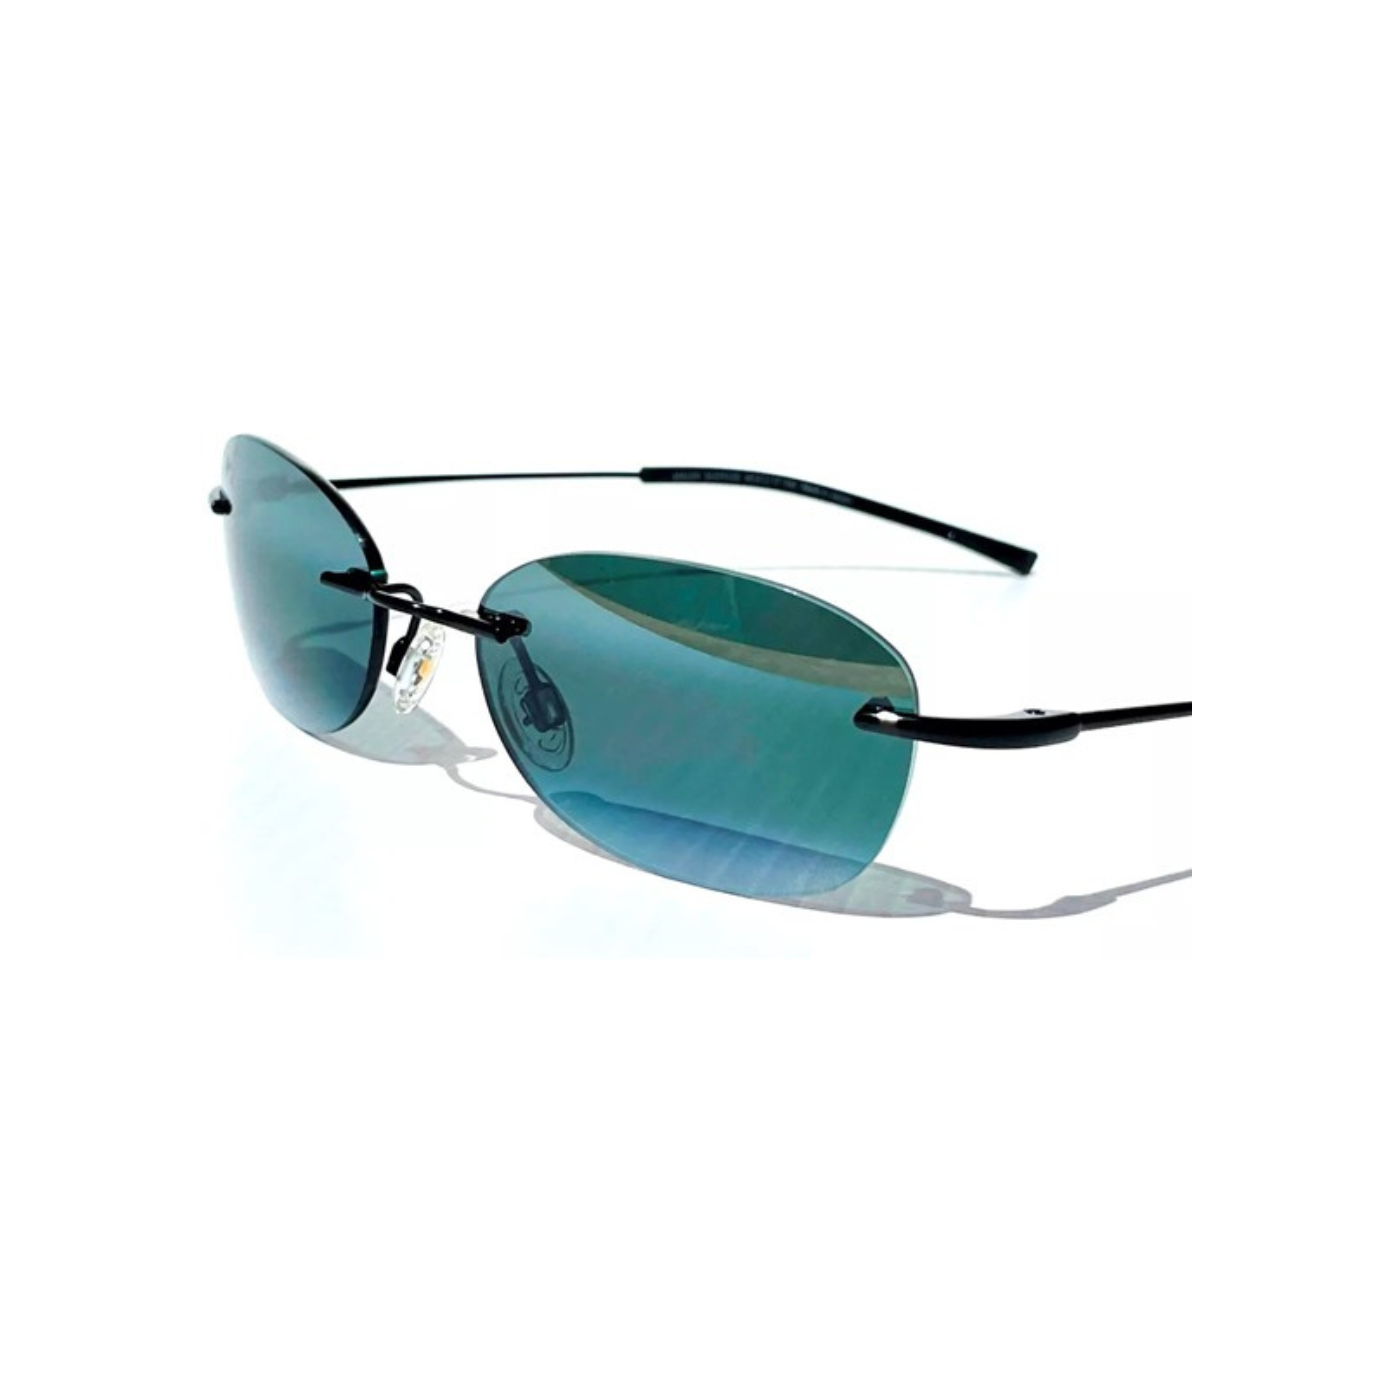 Maui Jim Sunglasses From Only $133 at Woot